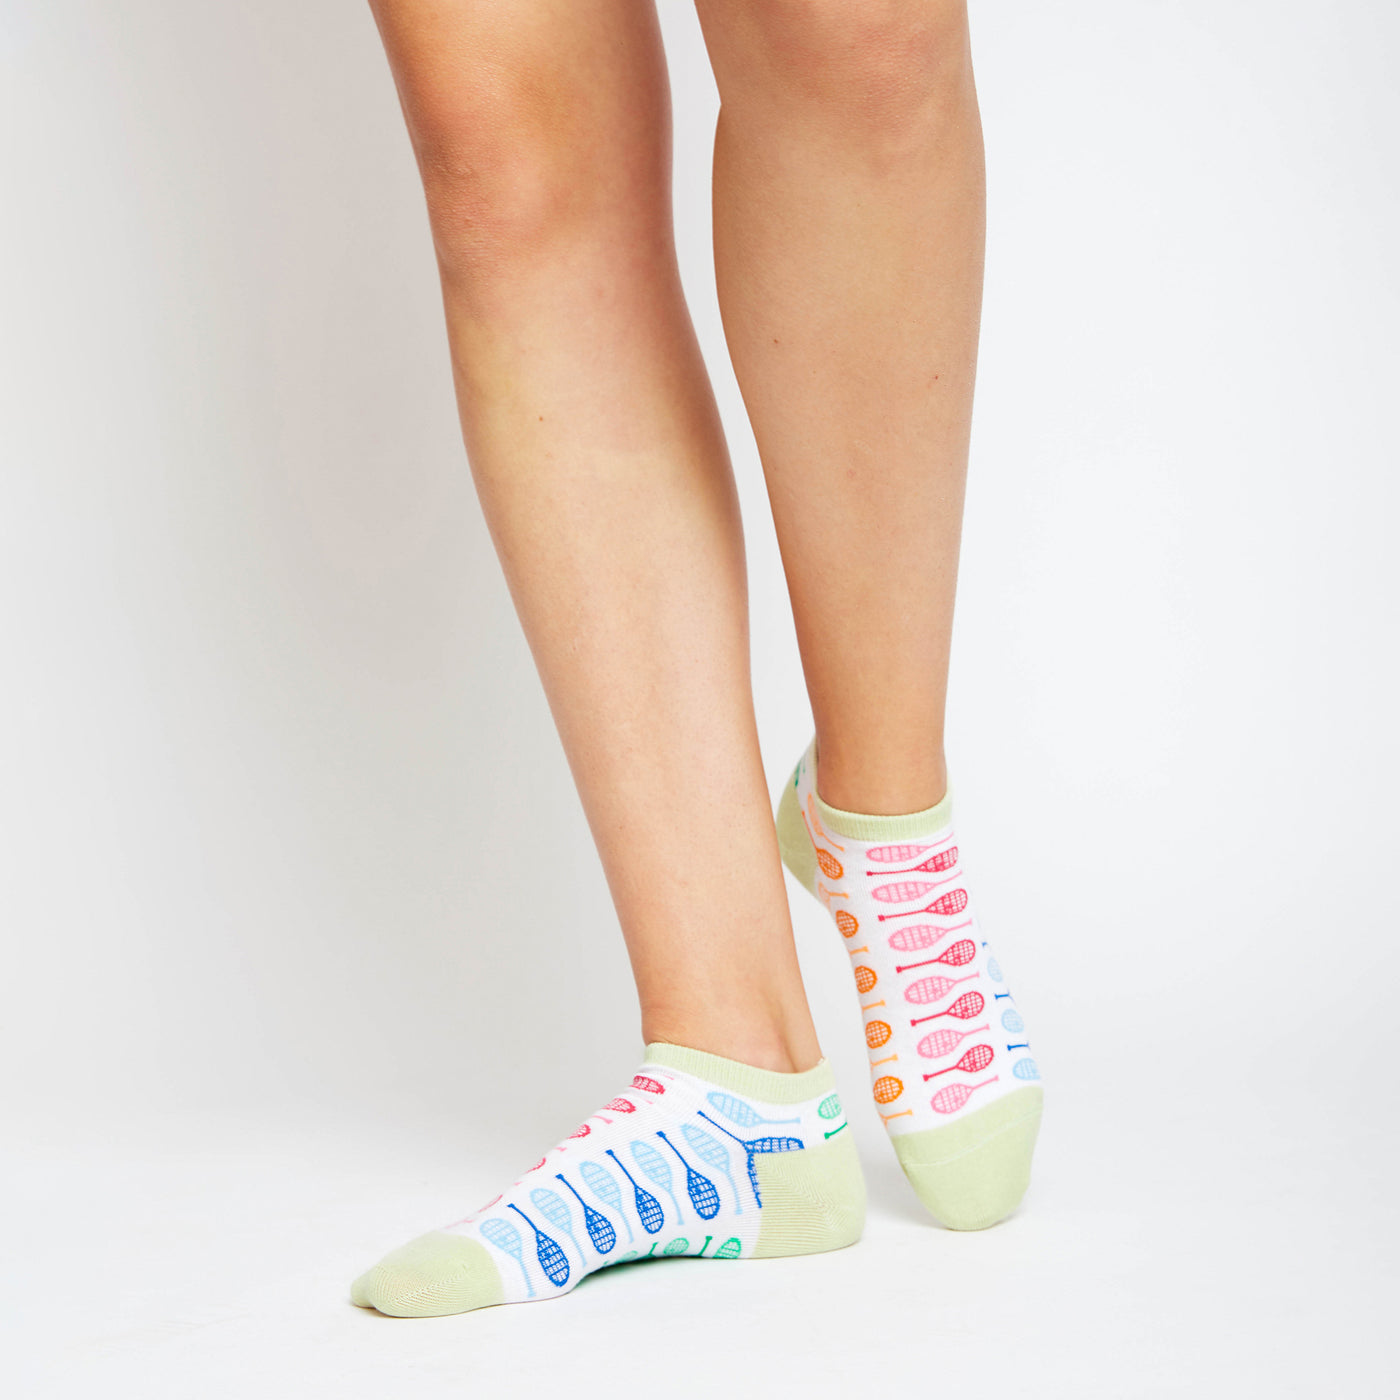 Woman wears a Pair of white socks with lime green heels and toes. Rainbow racquets are printed around the socks.